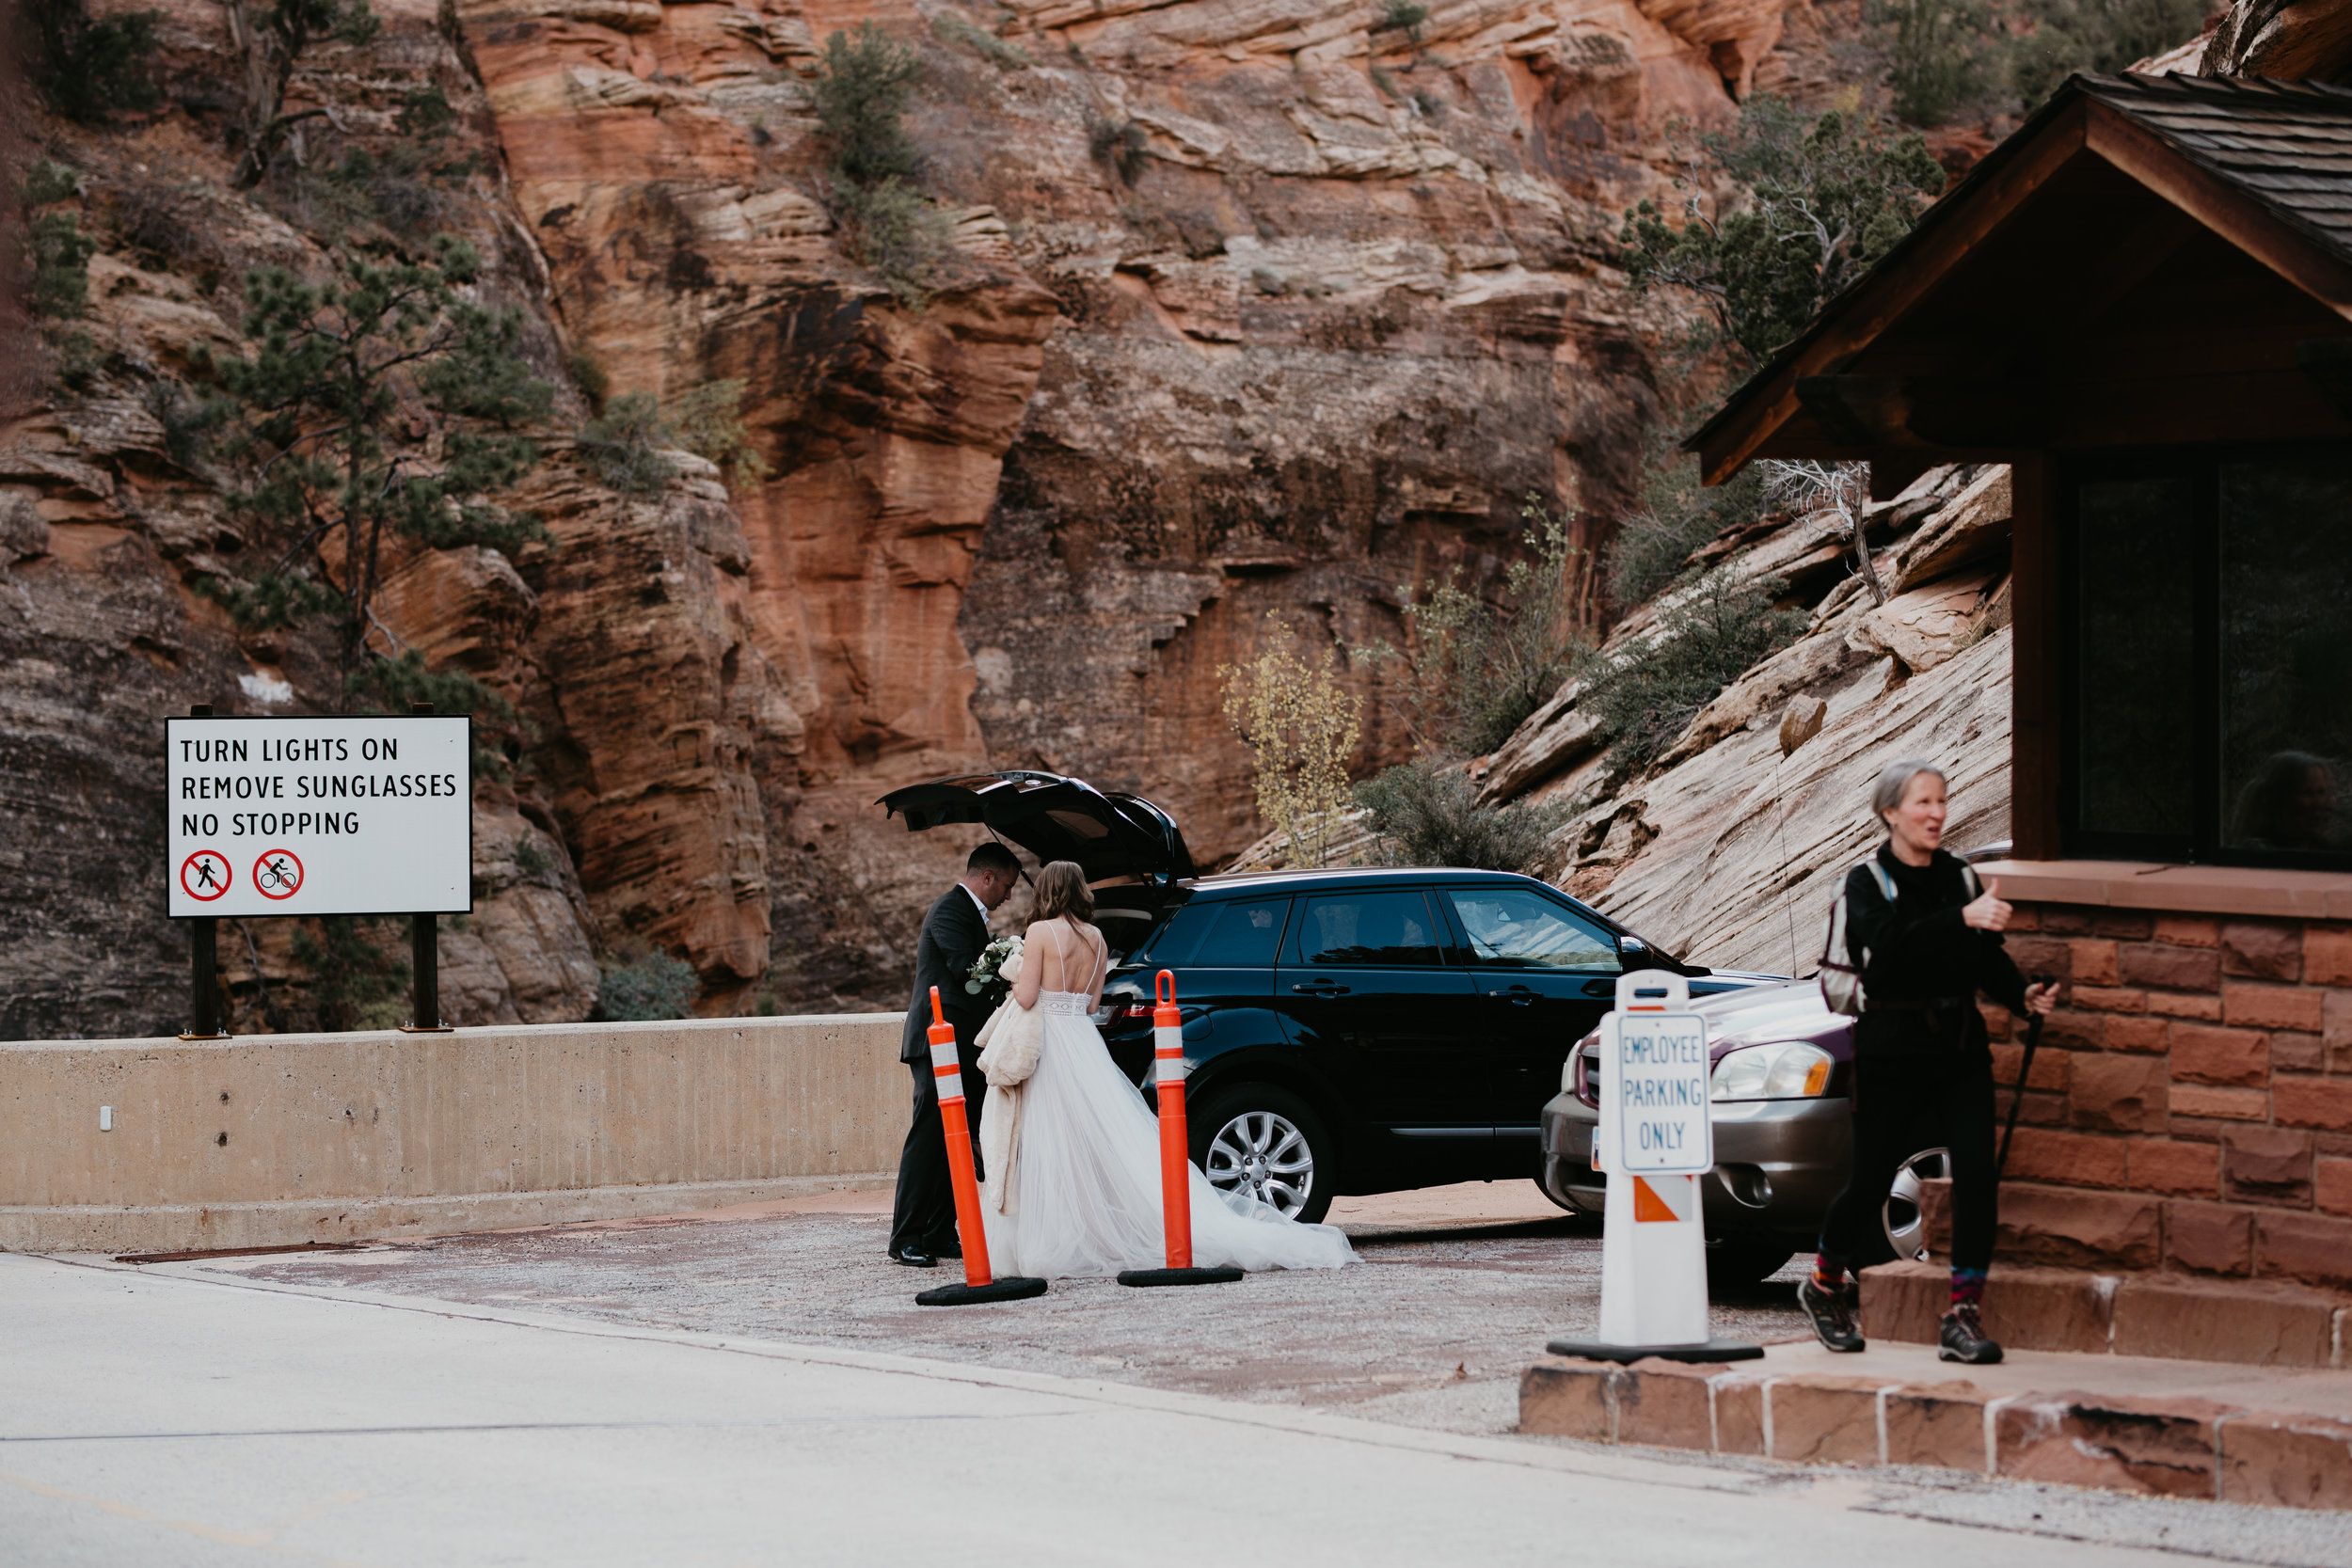 nicole-daacke-photography-zion-national-park-elopement-photographer-canyon-overlook-trail-elope-hiking-adventure-wedding-photos-fall-utah-red-rock-canyon-stgeorge-eloping-photographer-26.jpg